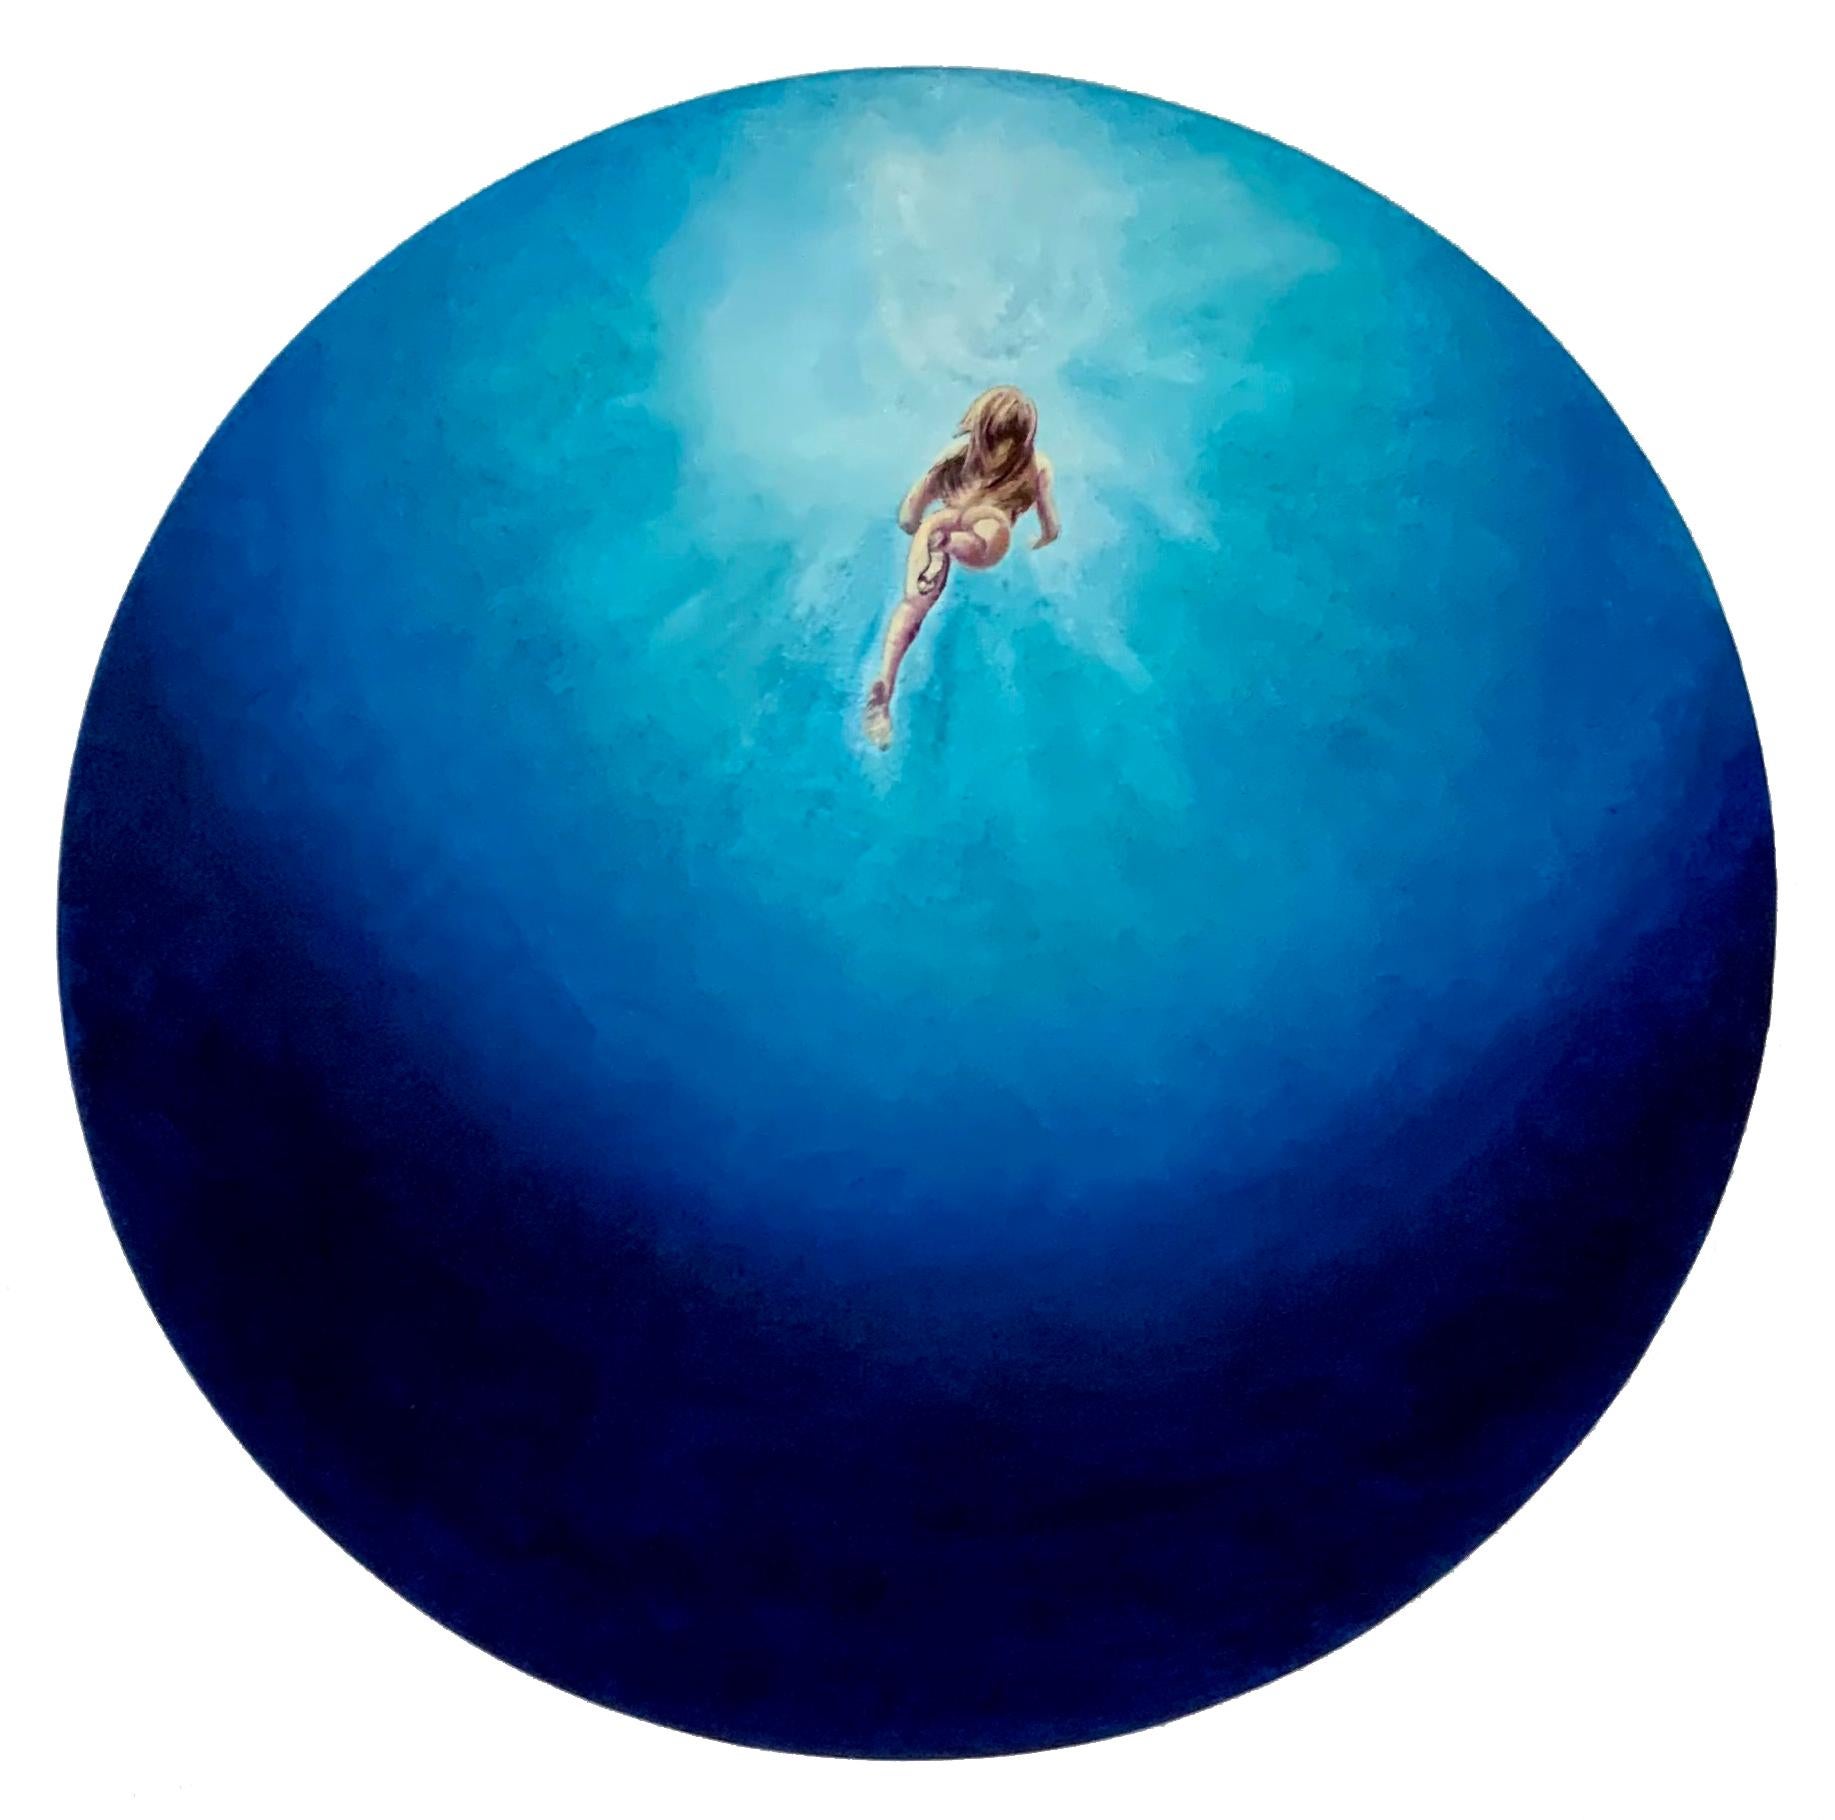 Anastasia Gklava Landscape Painting - "Blue Velvet", Bright blue tones, circular sea water painting with nude swimmer